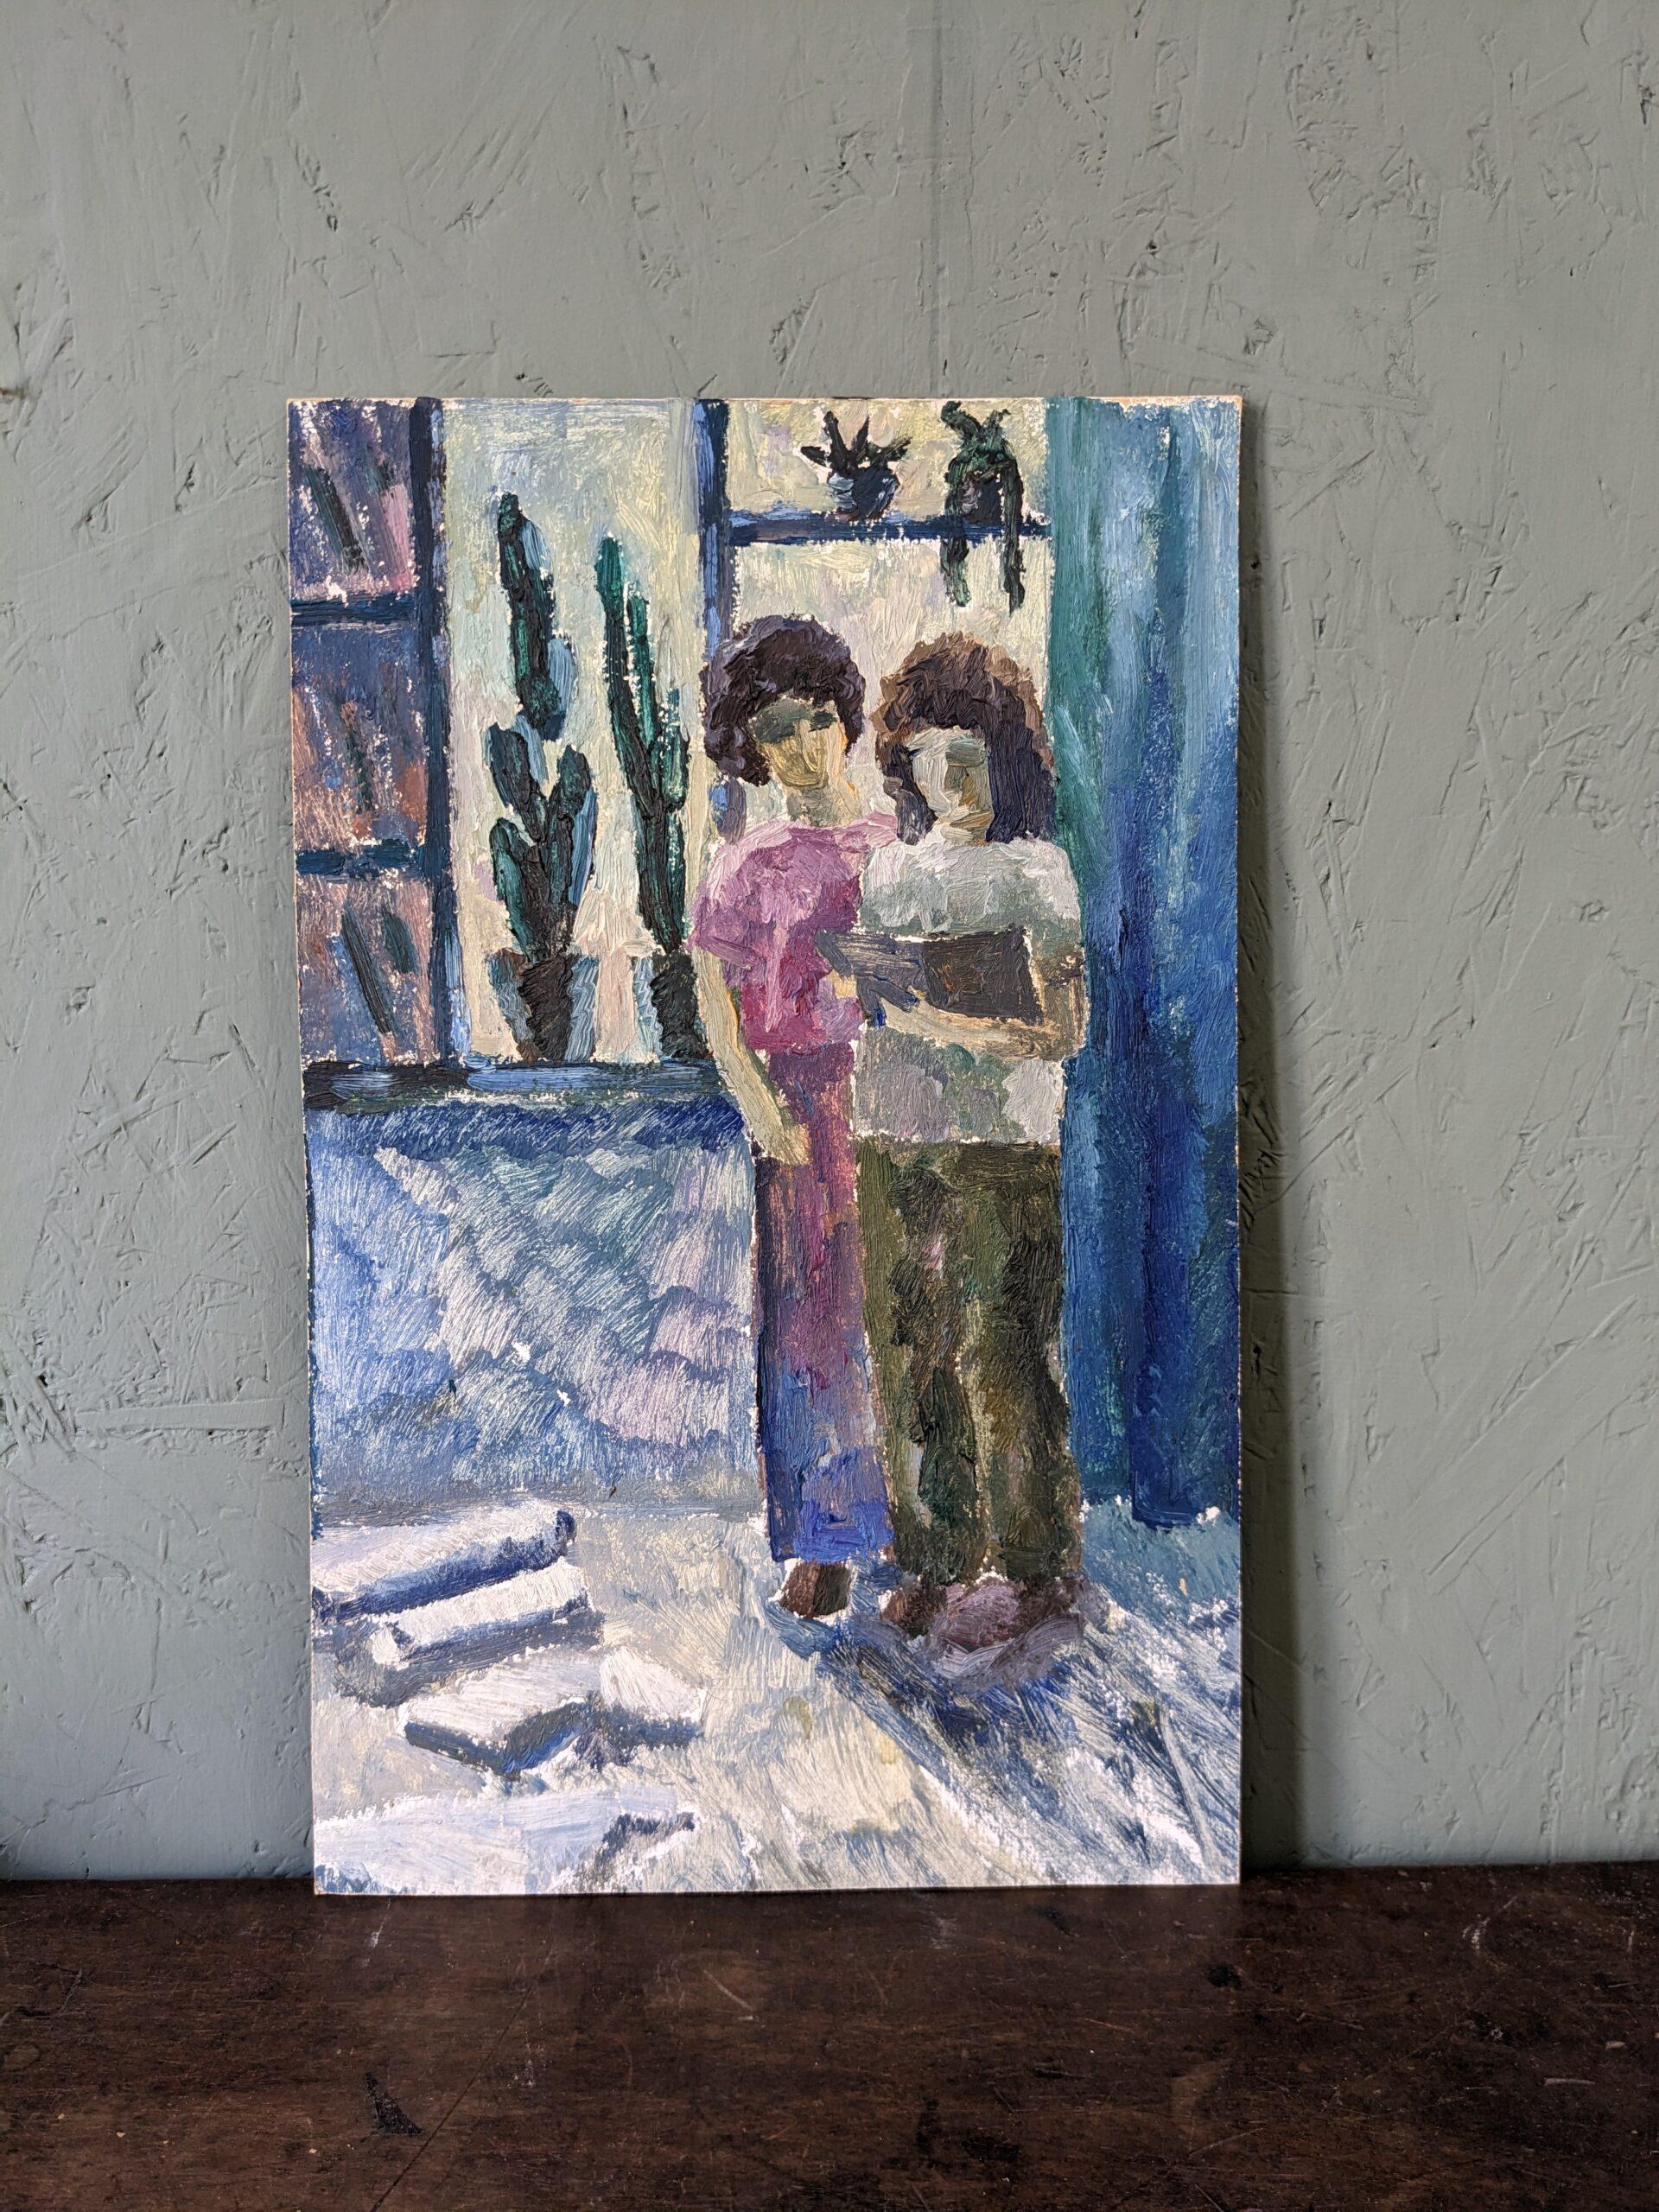 DOUBLE SIDED PORTRAIT I
Size: 48 x 30cm unframed
Oil on board

An intriguing double sided oil on board: one side depicts a pair of women looking into a book, and the other side features a striking single portrait of a woman.

The painting of the two